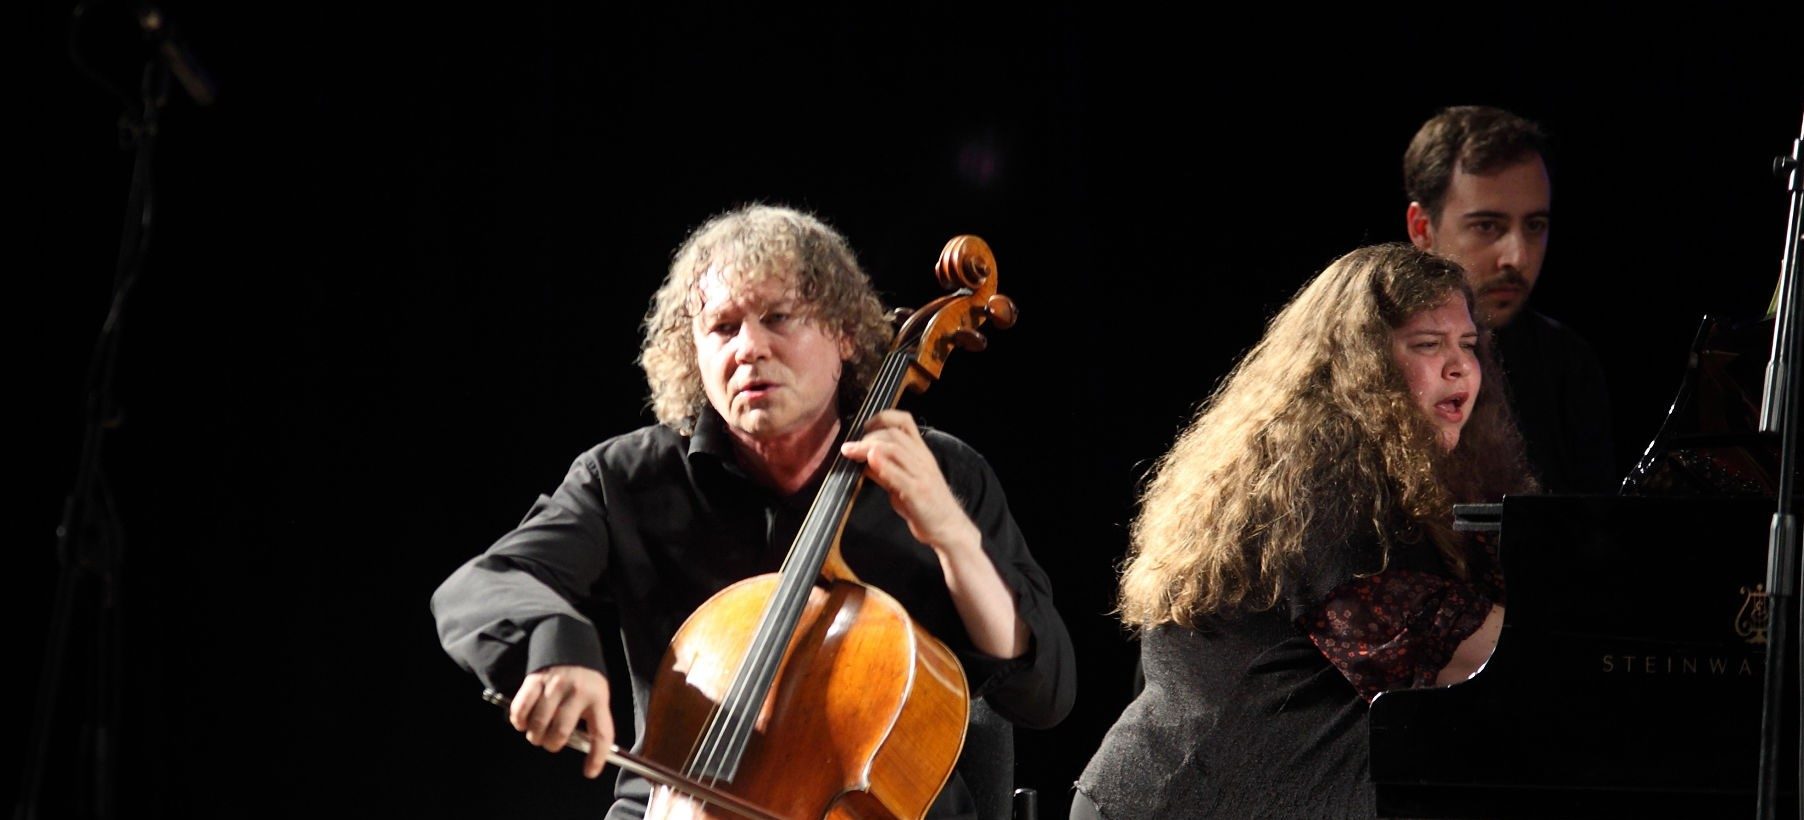 Musicians Alexander Knyazev, on cello, and Plamena Mangova, on piano, perform on stage at the Jerusalem International YMCA Concert Hall during the 19th Jerusalem International Chamber Music Festival (JCMF), Jerusalem, Israel, September 5, 2016. (Photo by Dan Porges/Getty Images)